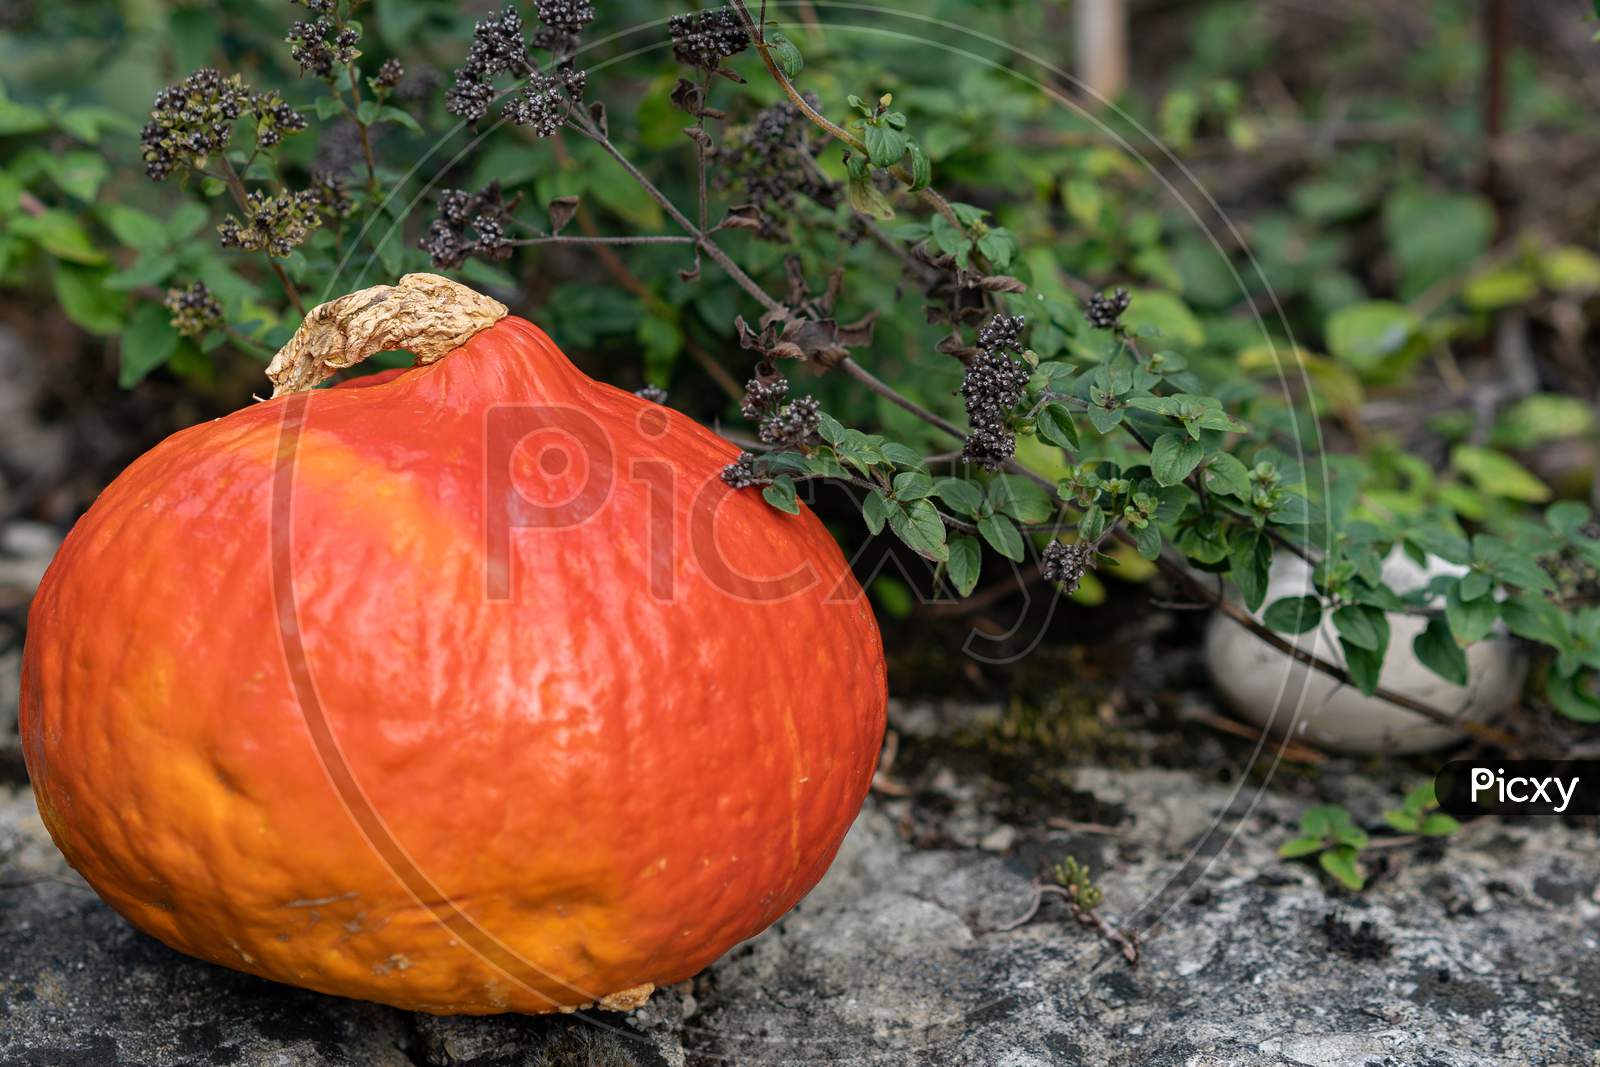 Orange Pumpkin On A Stone Platform On Foreground And Green Herbs Like Marjoram And Round Stone In Background.